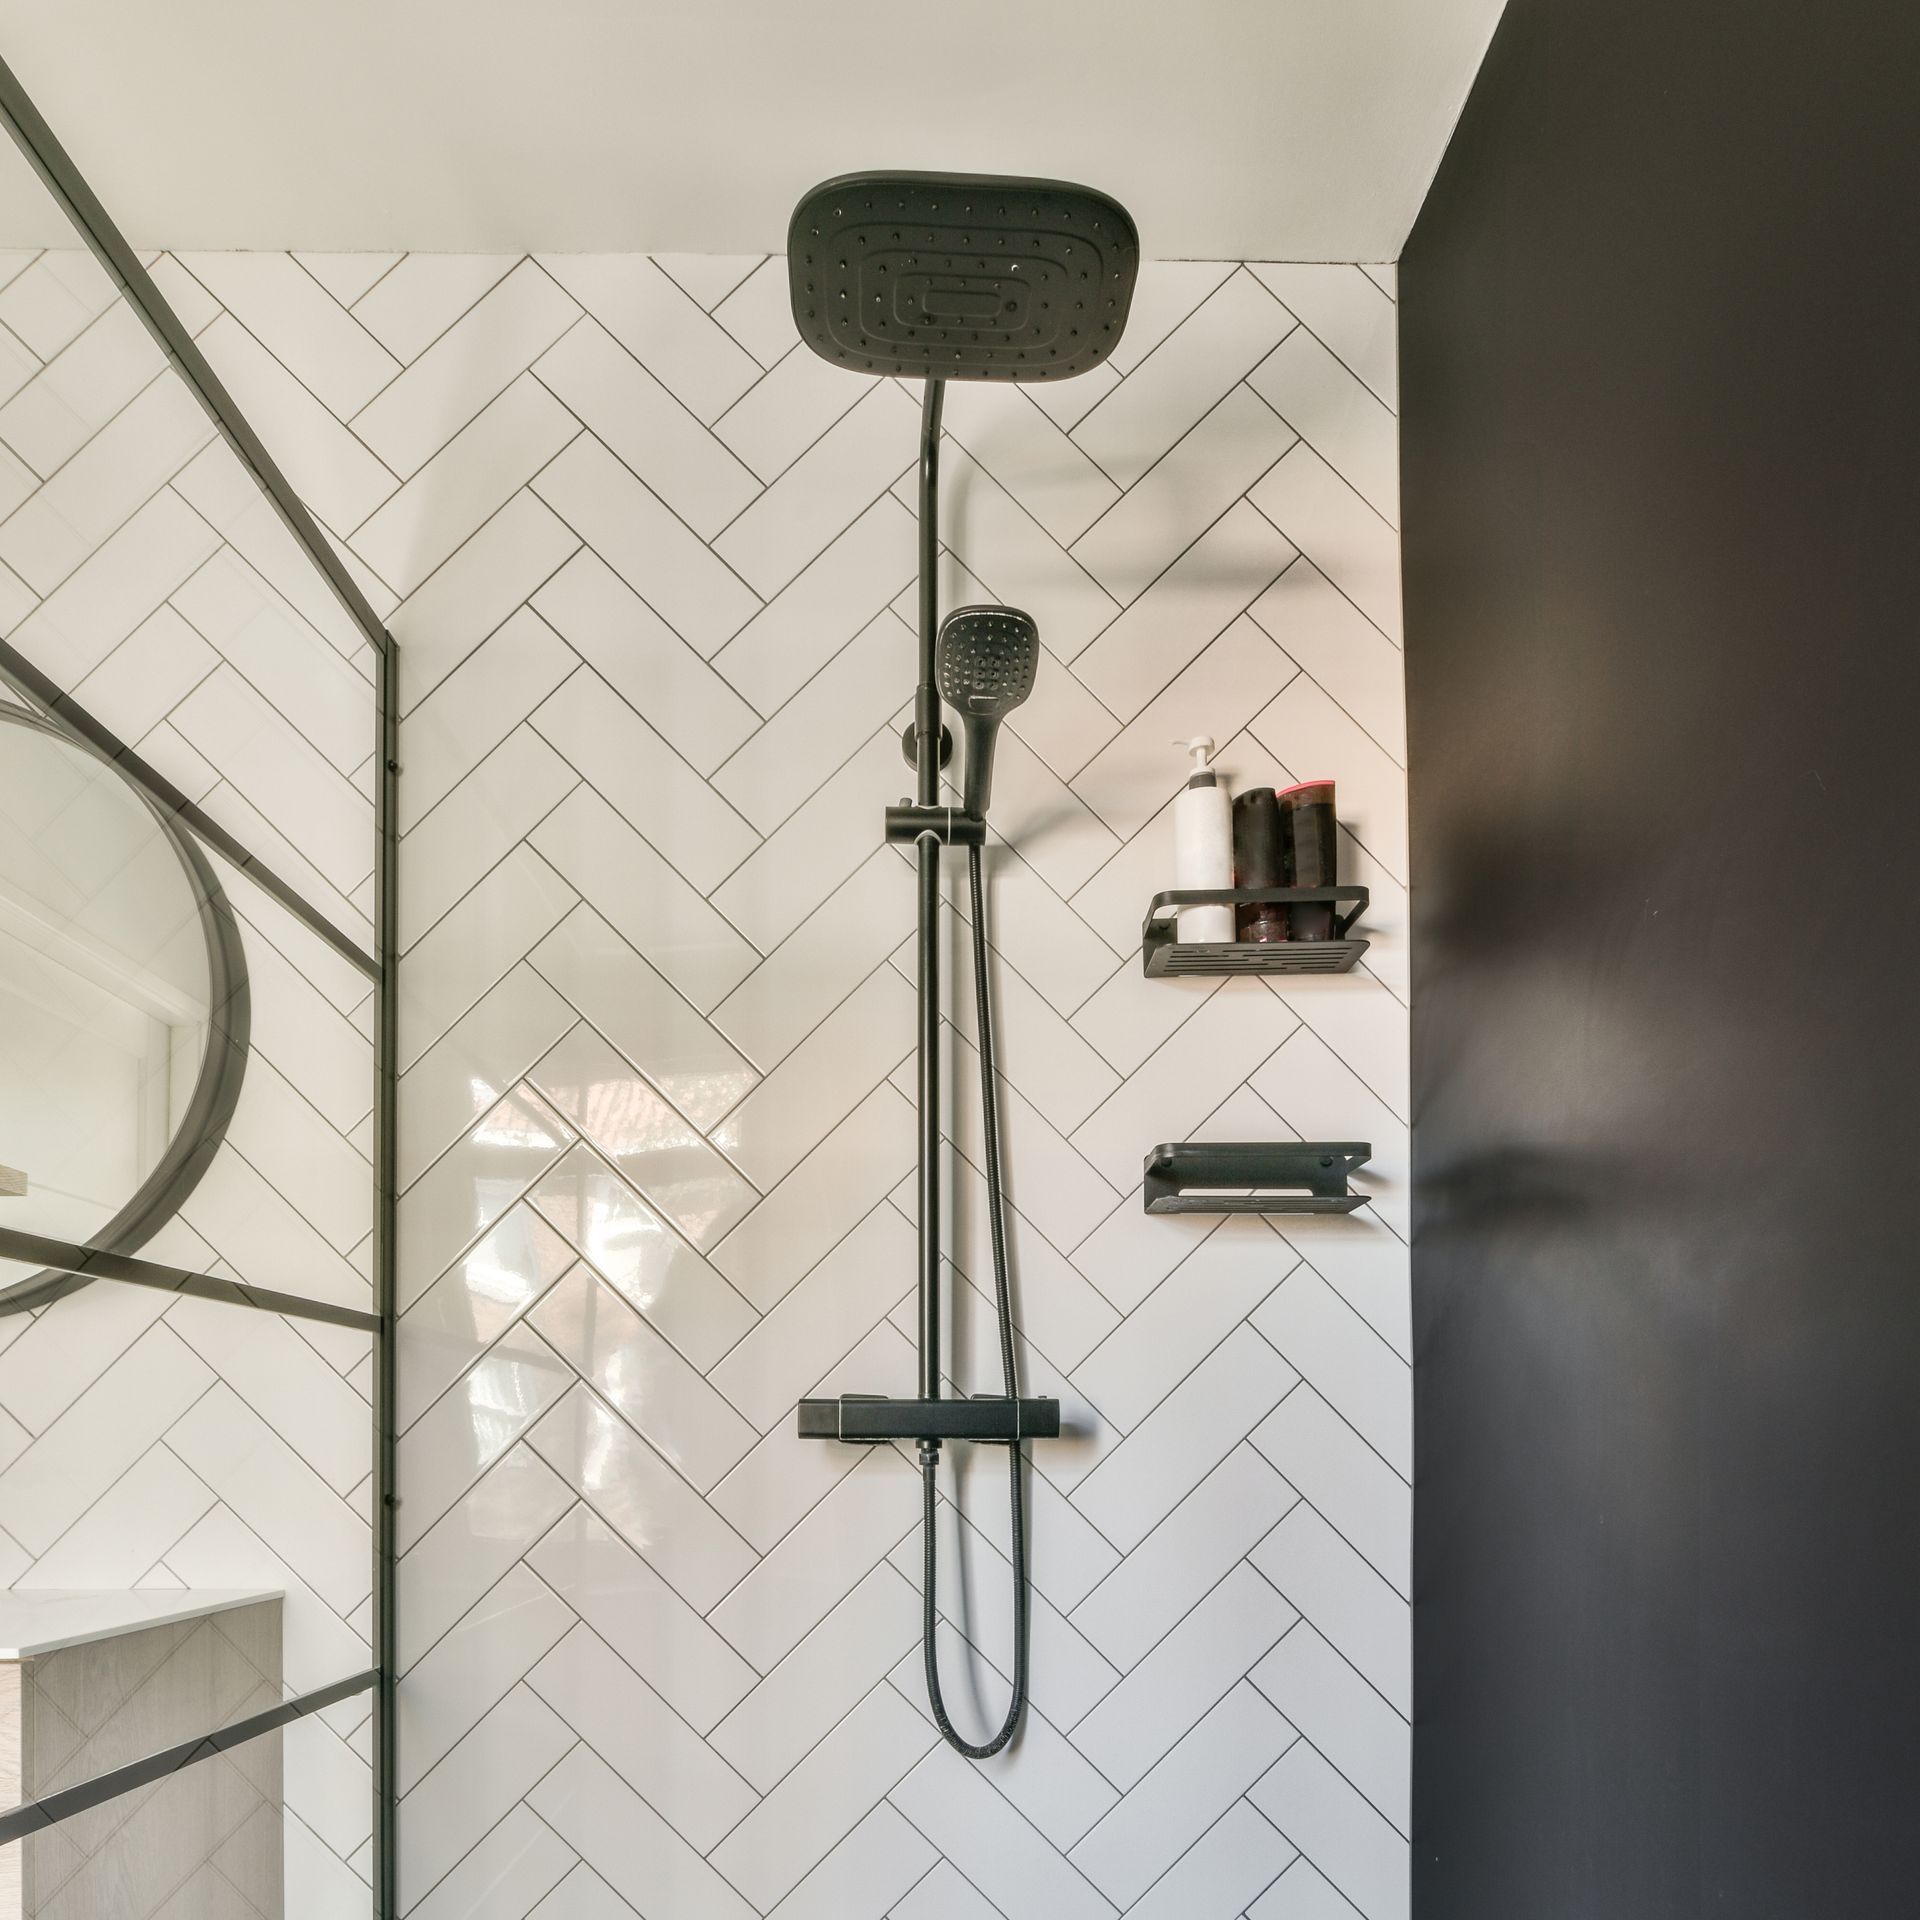 black shower head in a bathroom with white tiles